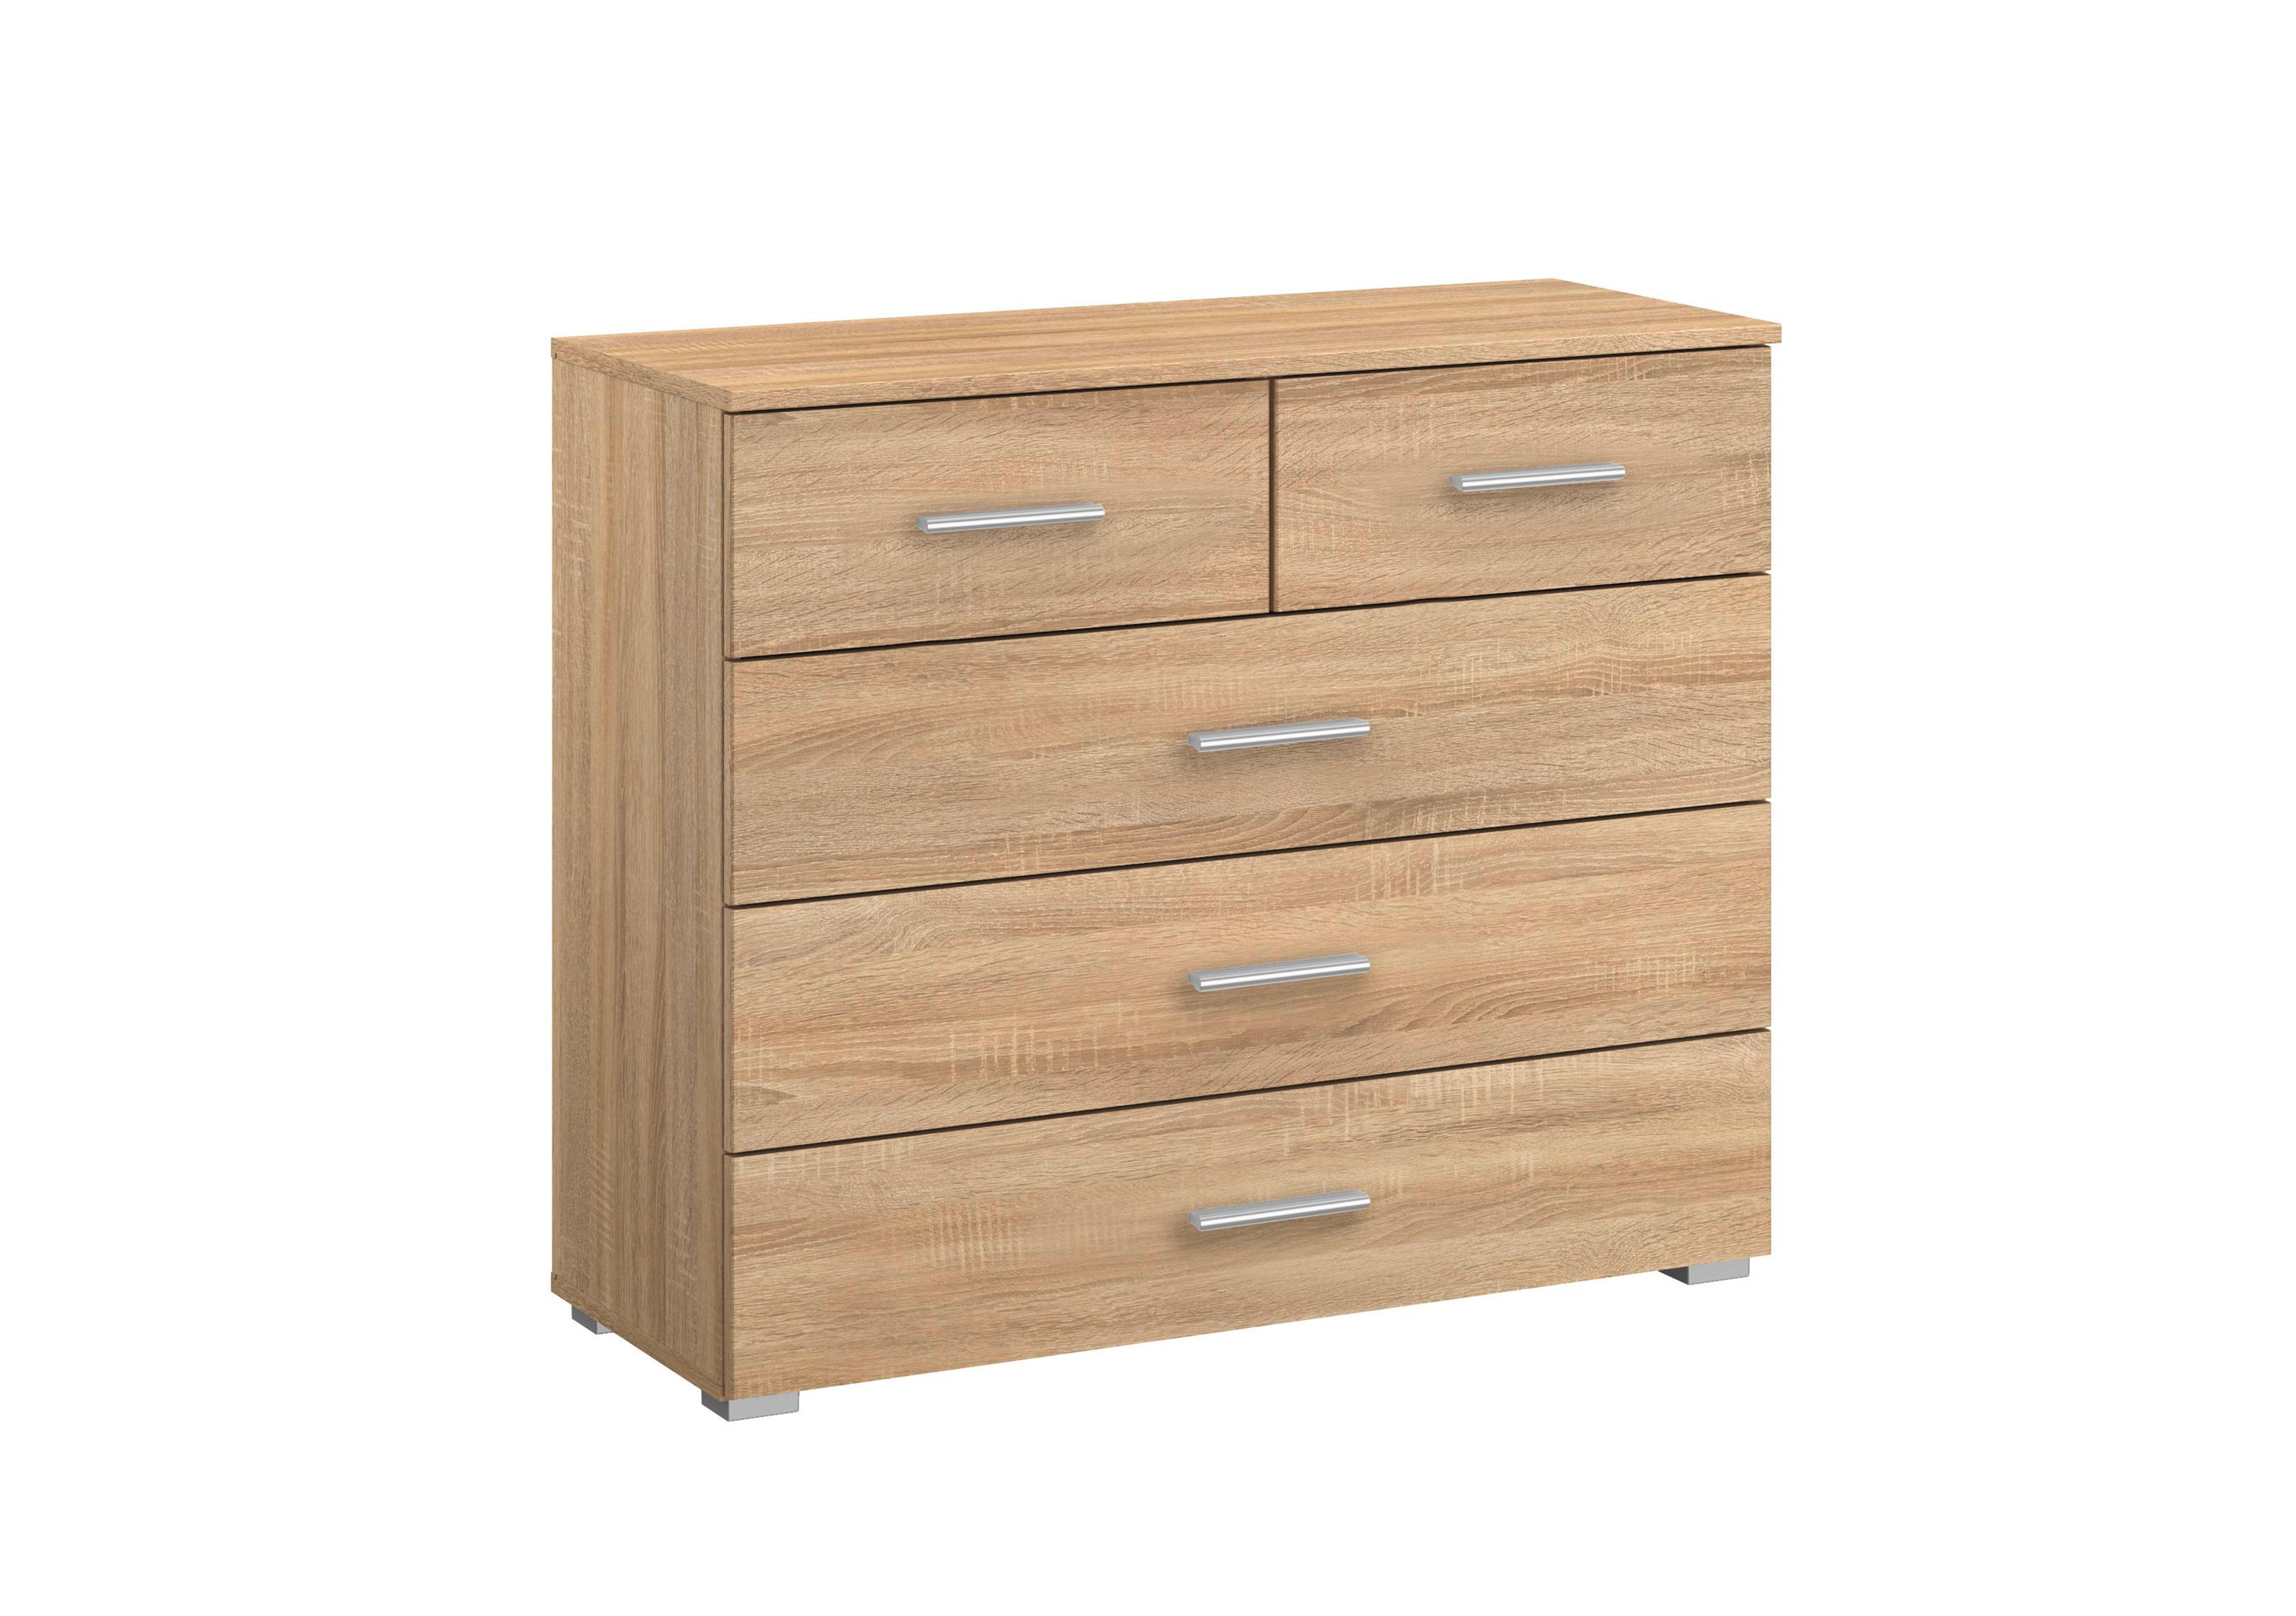 Solo 3+2 Chest of Drawers in Ak629 Sonoma Oak on Furniture Village